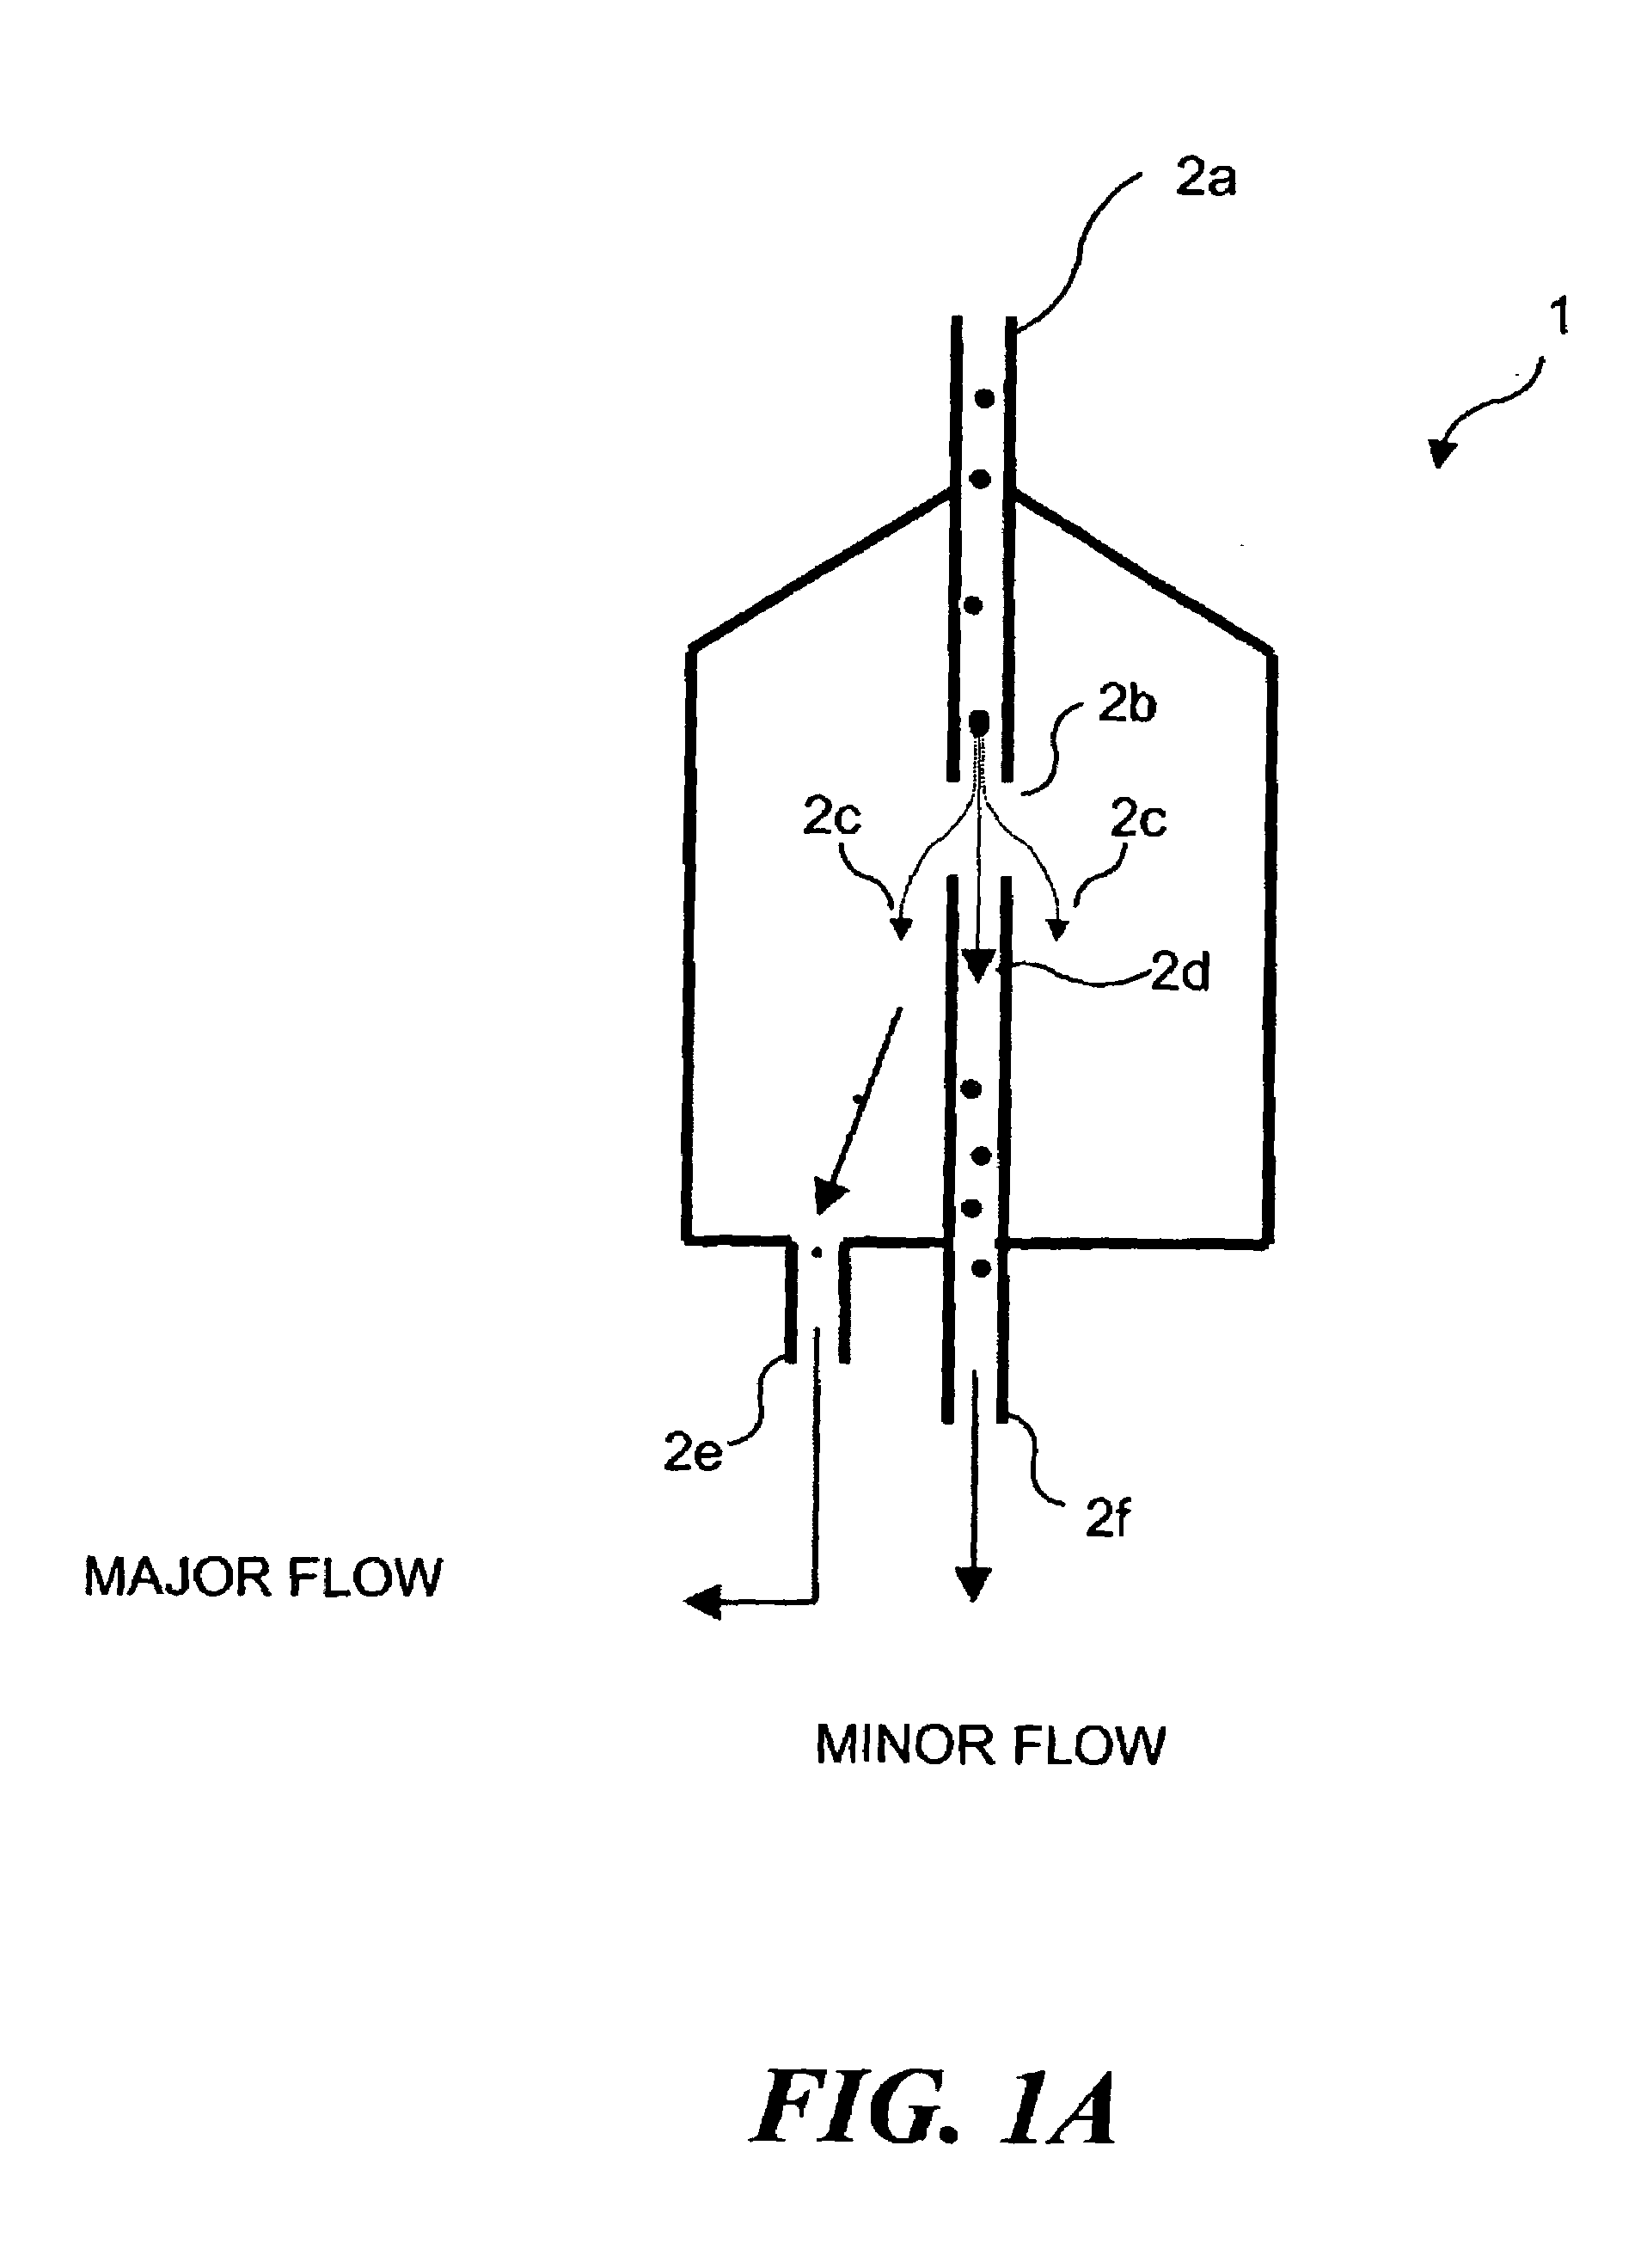 Devices for continuous sampling of airborne particles using a regenerative surface